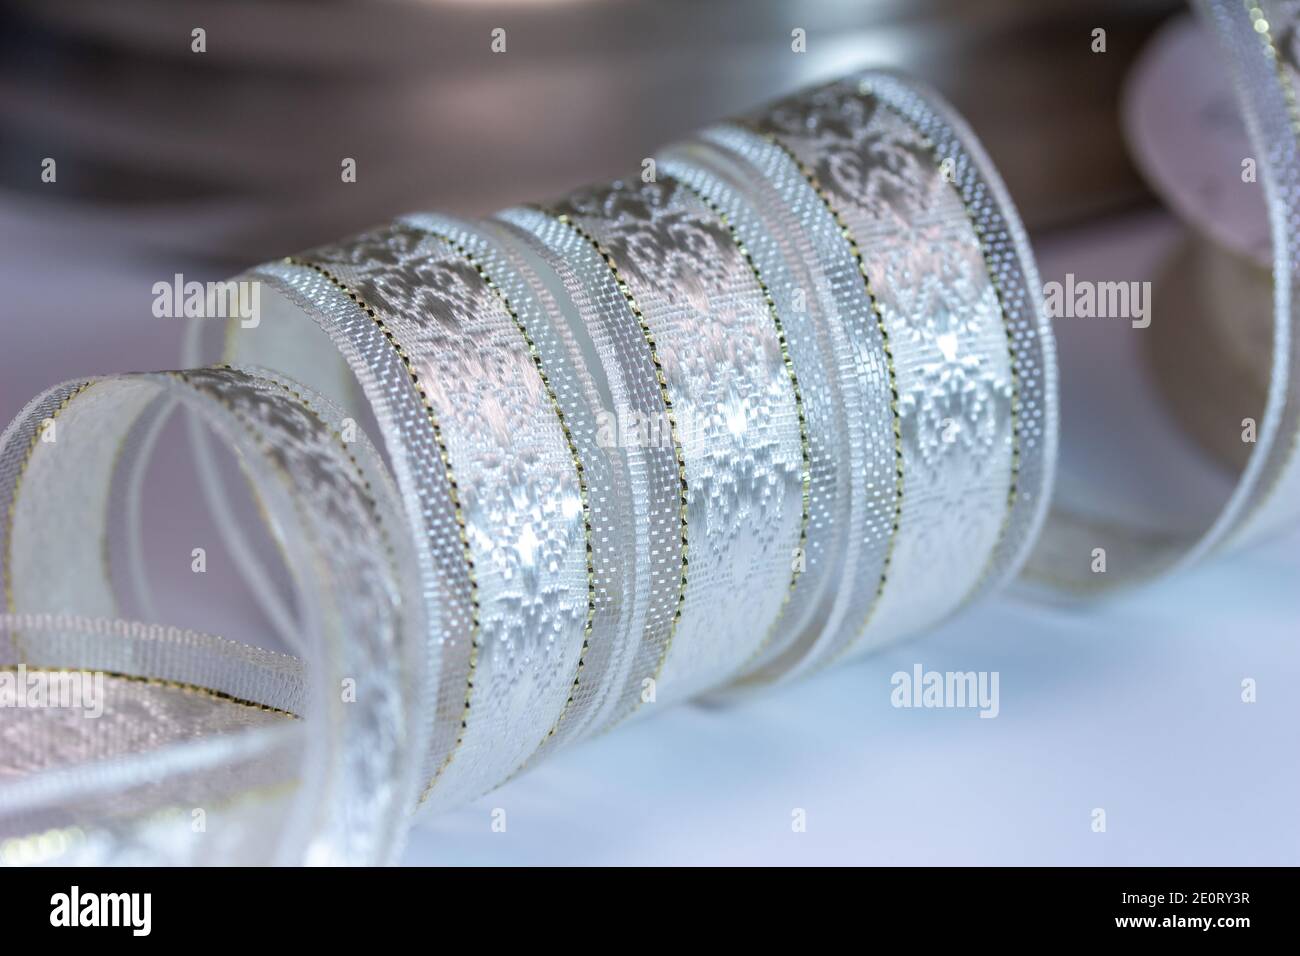 Macro defocused full frame texture abstract of shimmering silvery white brocade fabric ribbon, with golden accent stitches on a white background Stock Photo